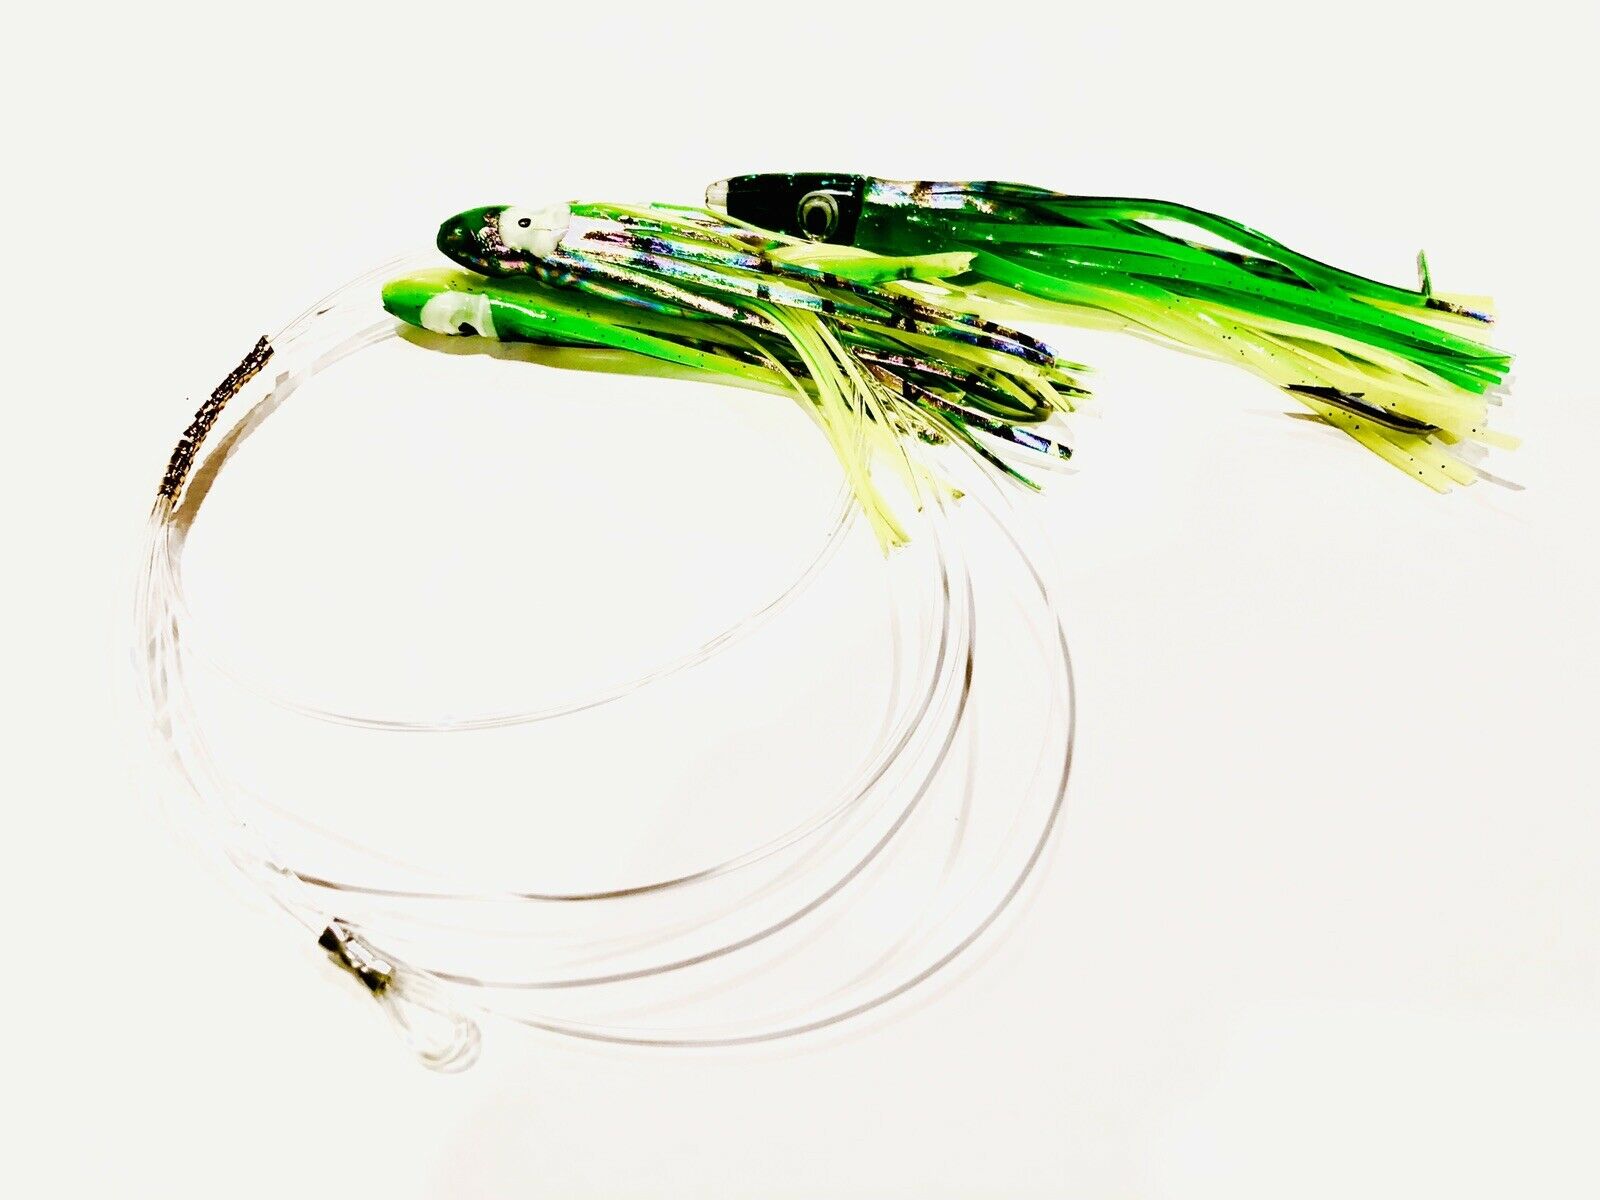 Saltwater Trolling Daisy Chains Set of 3